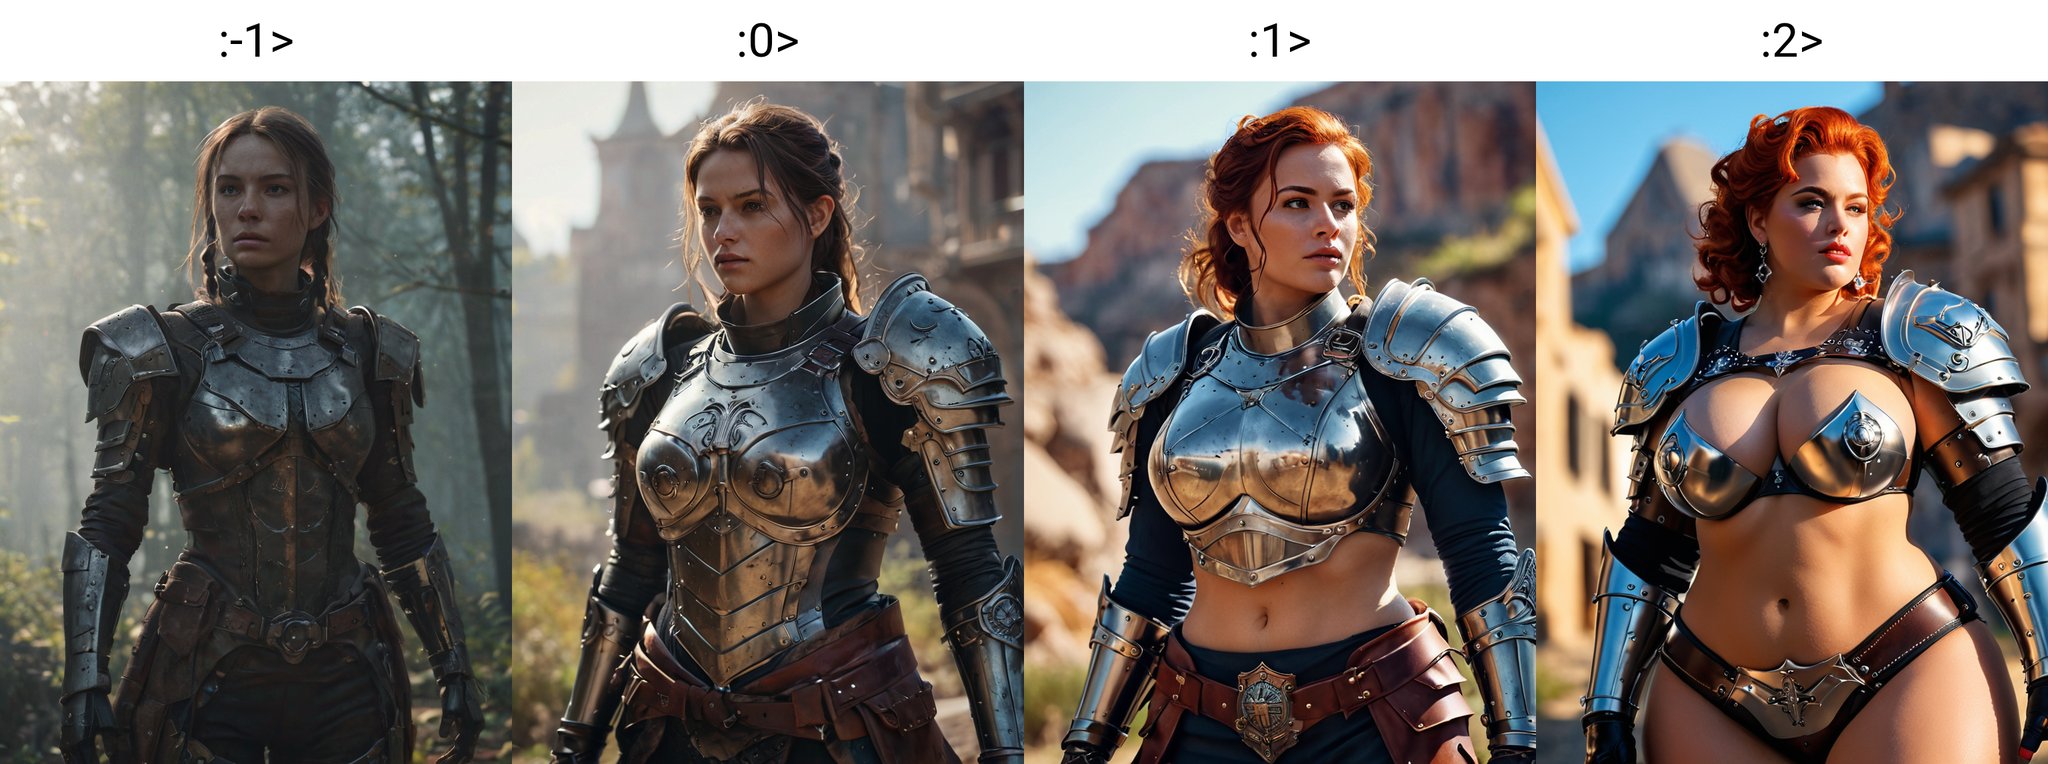 full body cinematic photo a  woman wearing armor by nikolay makovsky : 10, 4k resolution; detailed film still promotional image ektachrome photograph wide angle lens ; low contrast dramatic lighting unreal engine 5 cinematic color grading composition and effects makeup design trending on artstation oct  . 35mm photograph, film, bokeh, professional, 4k, highly detailed <lora:SkinnyVoluptousSliderXL:-1>